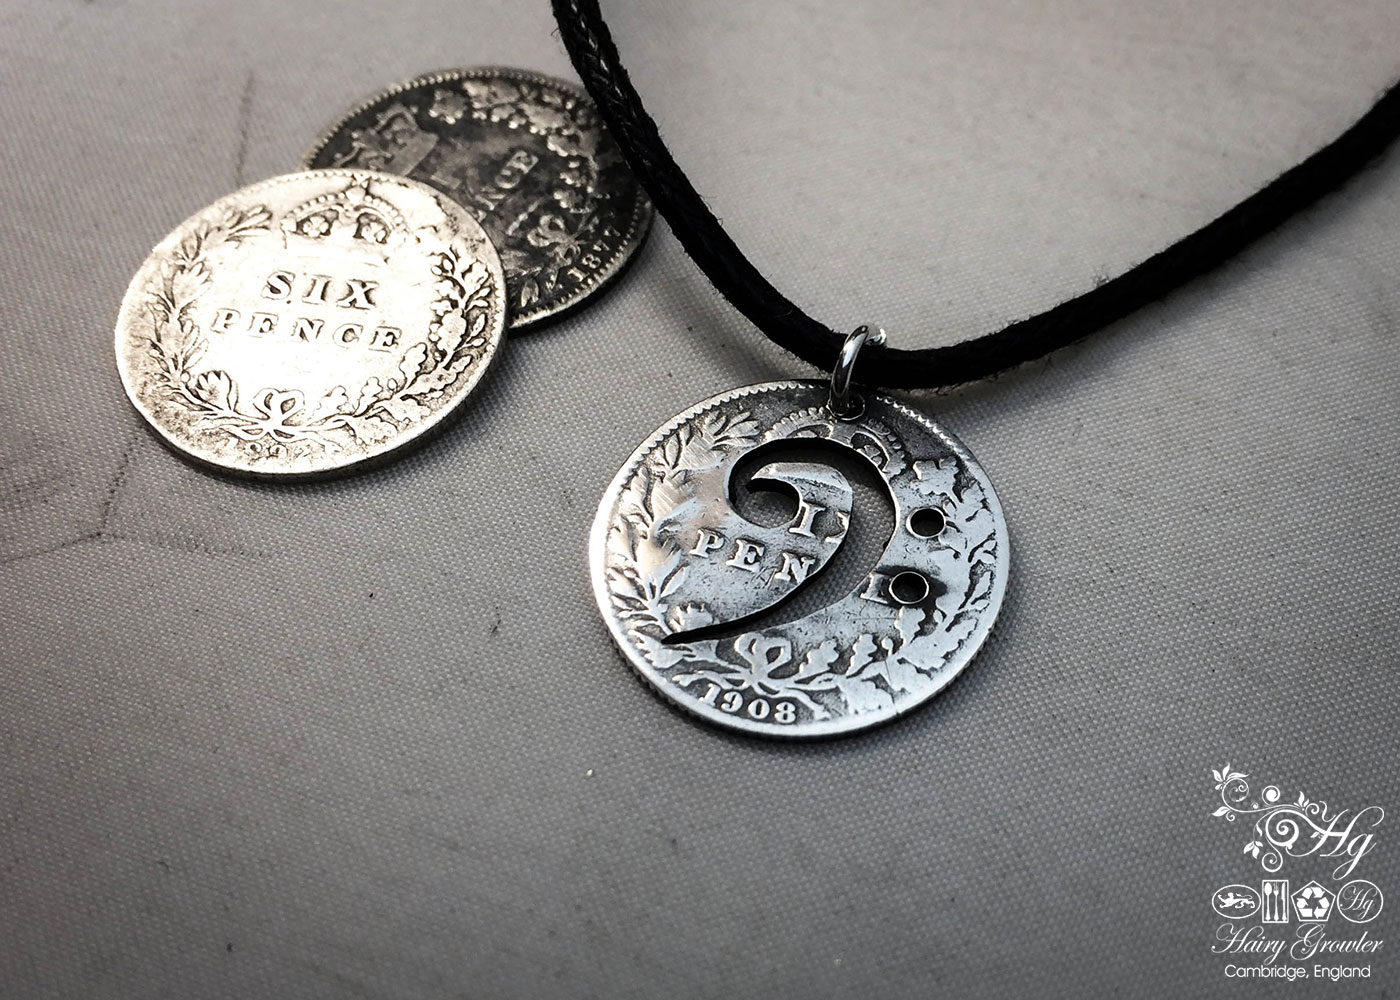 Bass Clef necklace - handmade and recycled using silver sixpence